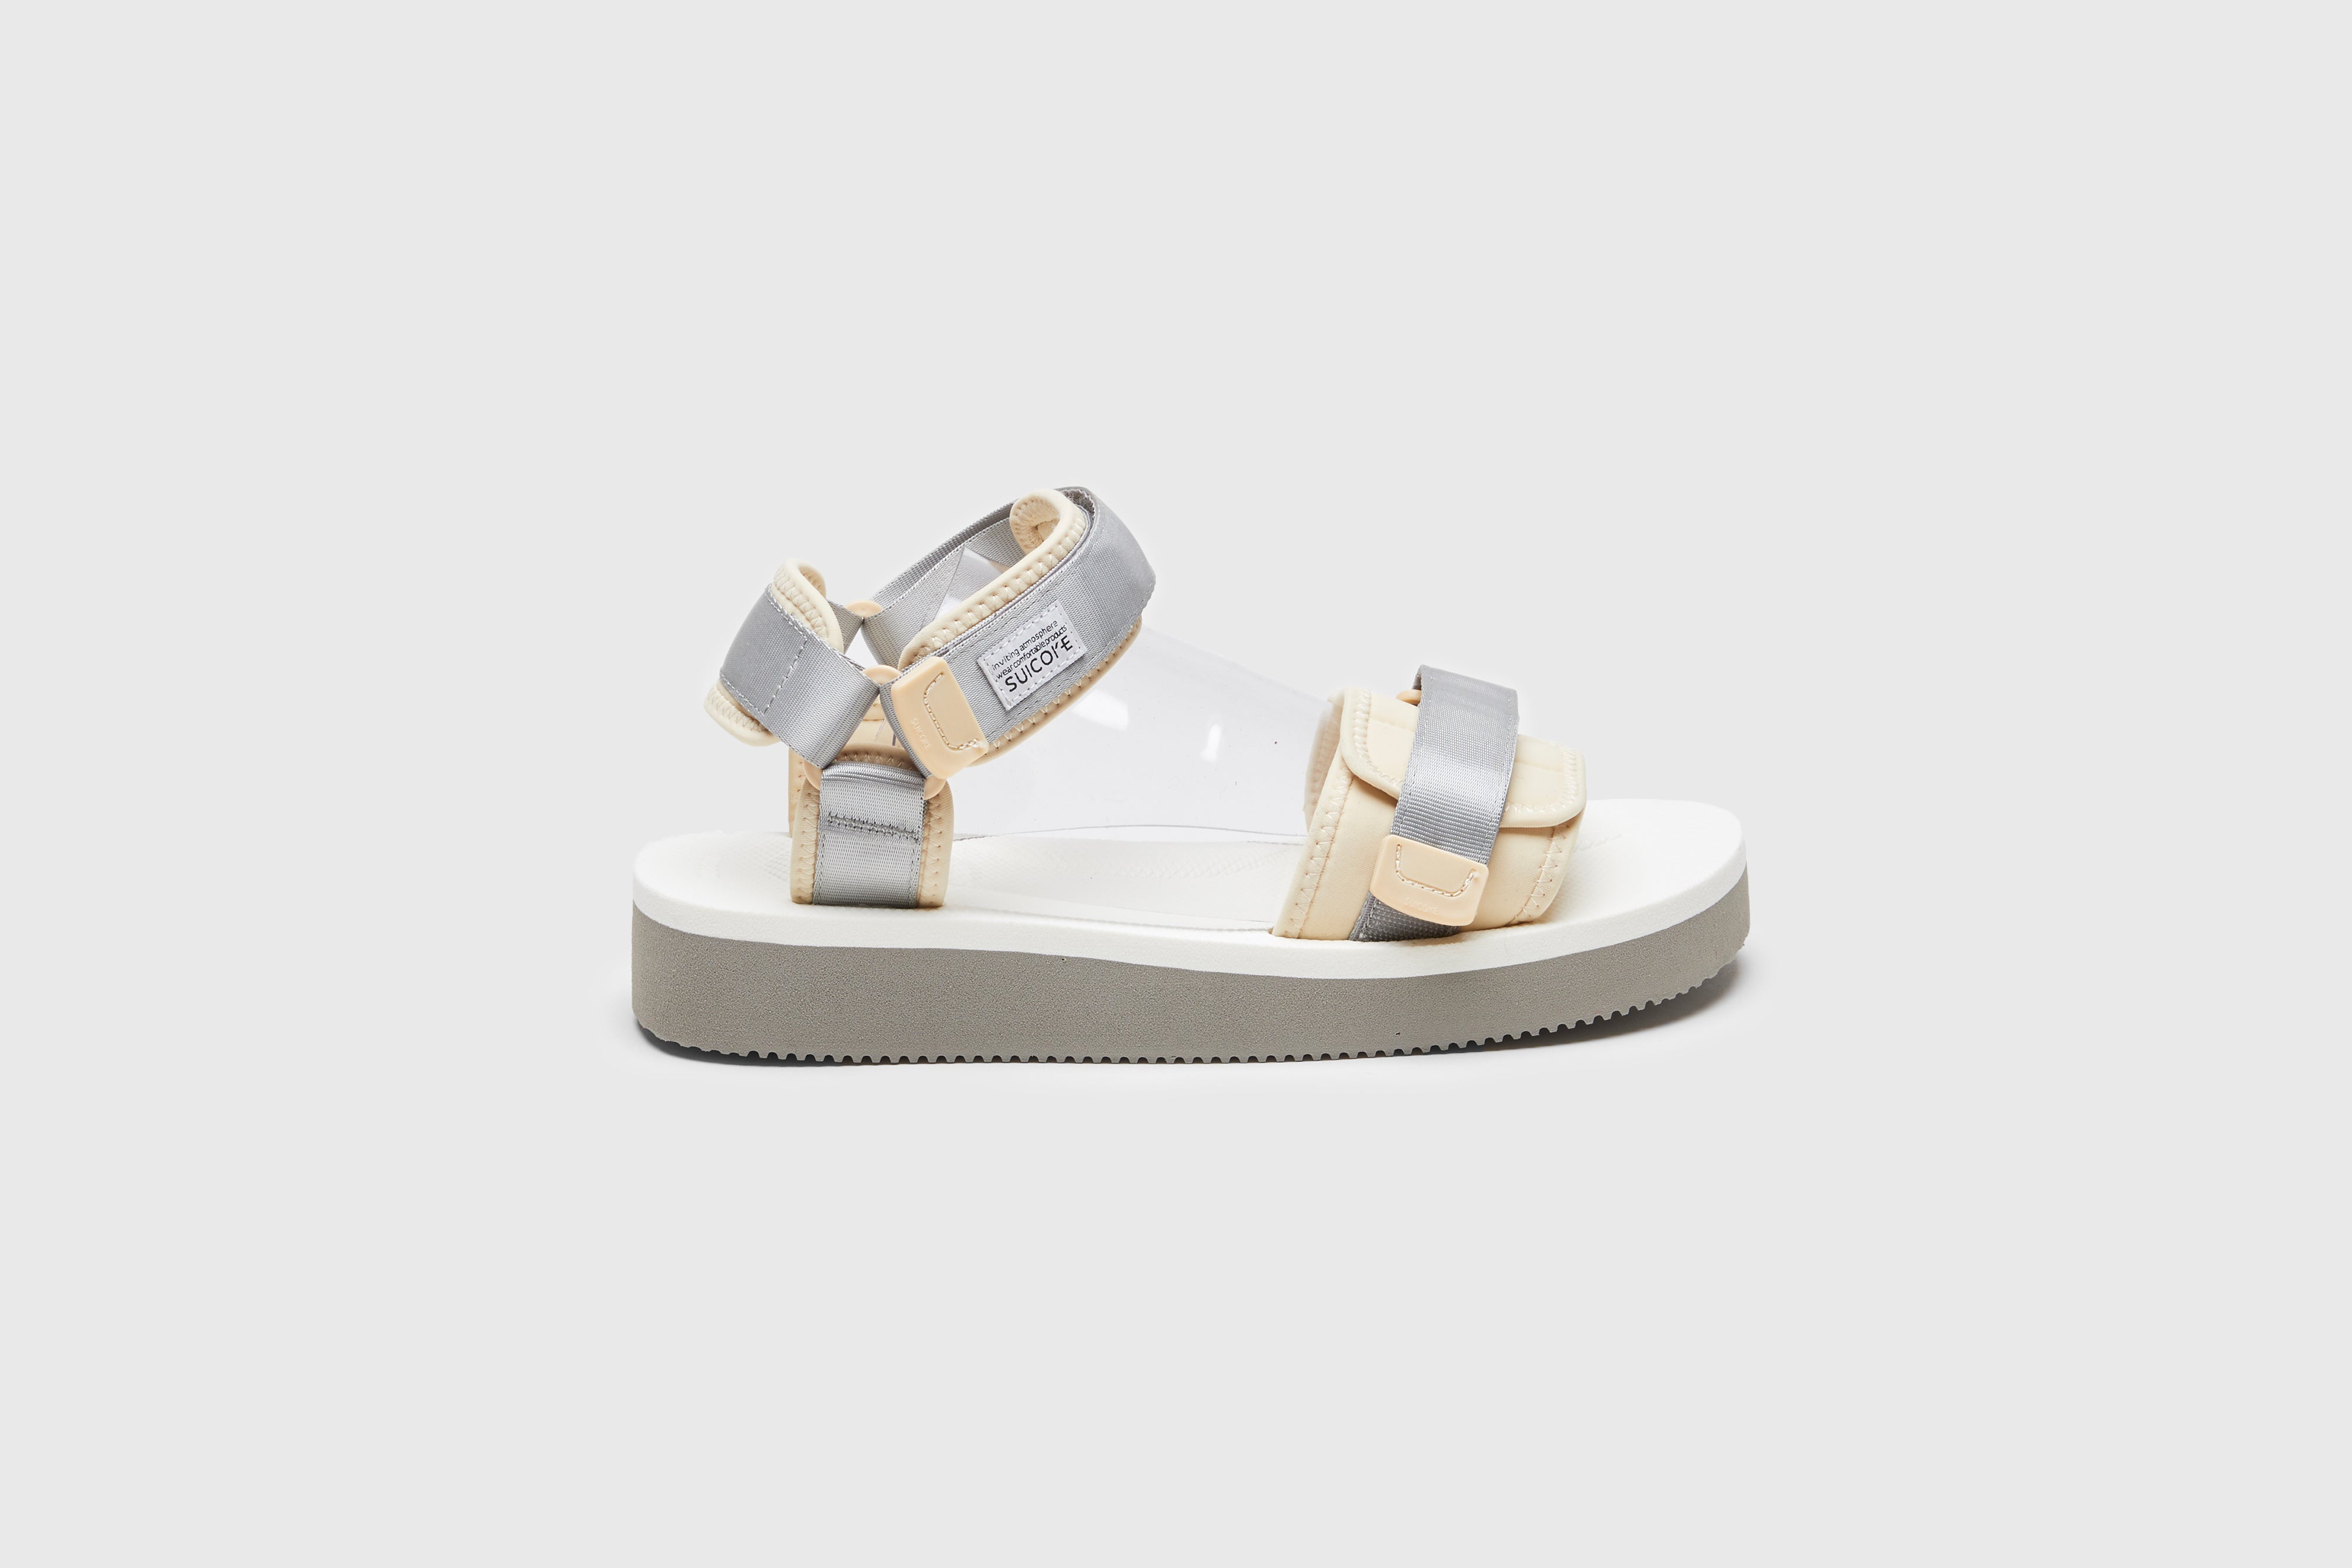 SUICOKE CEL-PO sandals with gray & white nylon upper, gray & white midsole and sole, strap and logo patch. From Spring/Summer 2023 collection on eightywingold Web Store, an official partner of SUICOKE. OG-022PO GRAY X WHITE